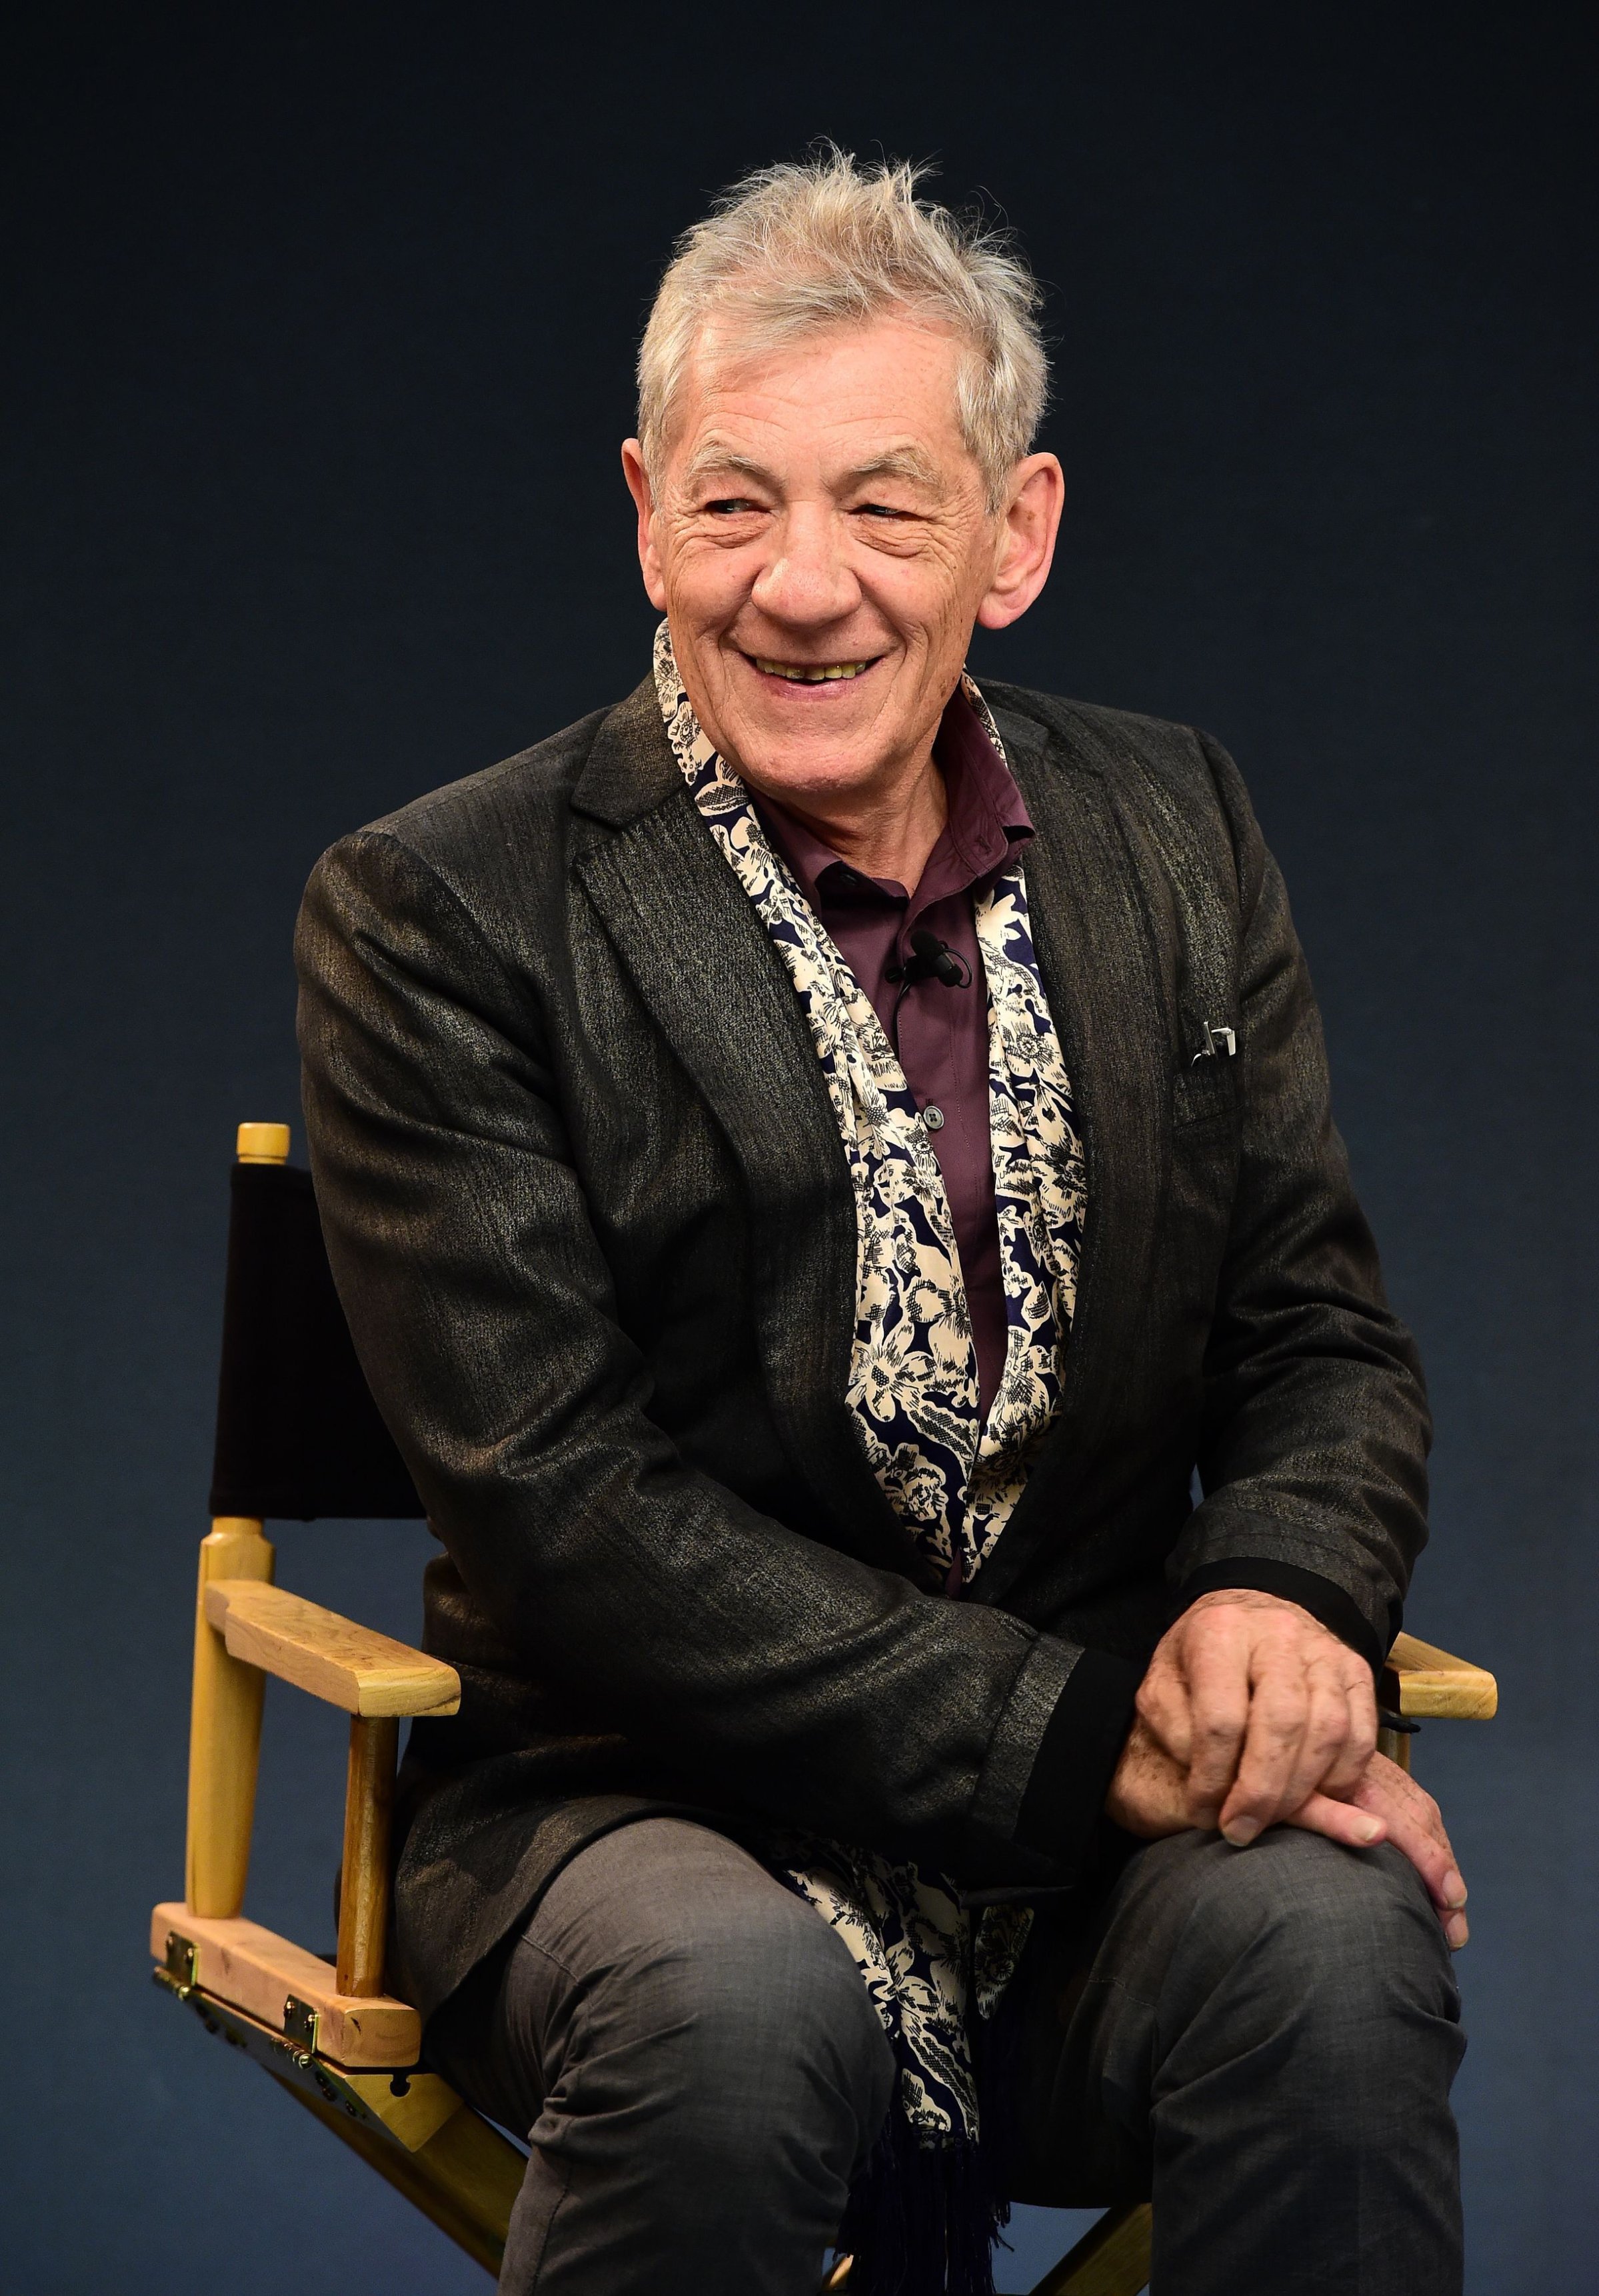 Sir Ian McKellen attends a Meet The Actor event at the Apple Store in London on May 26, 2015.